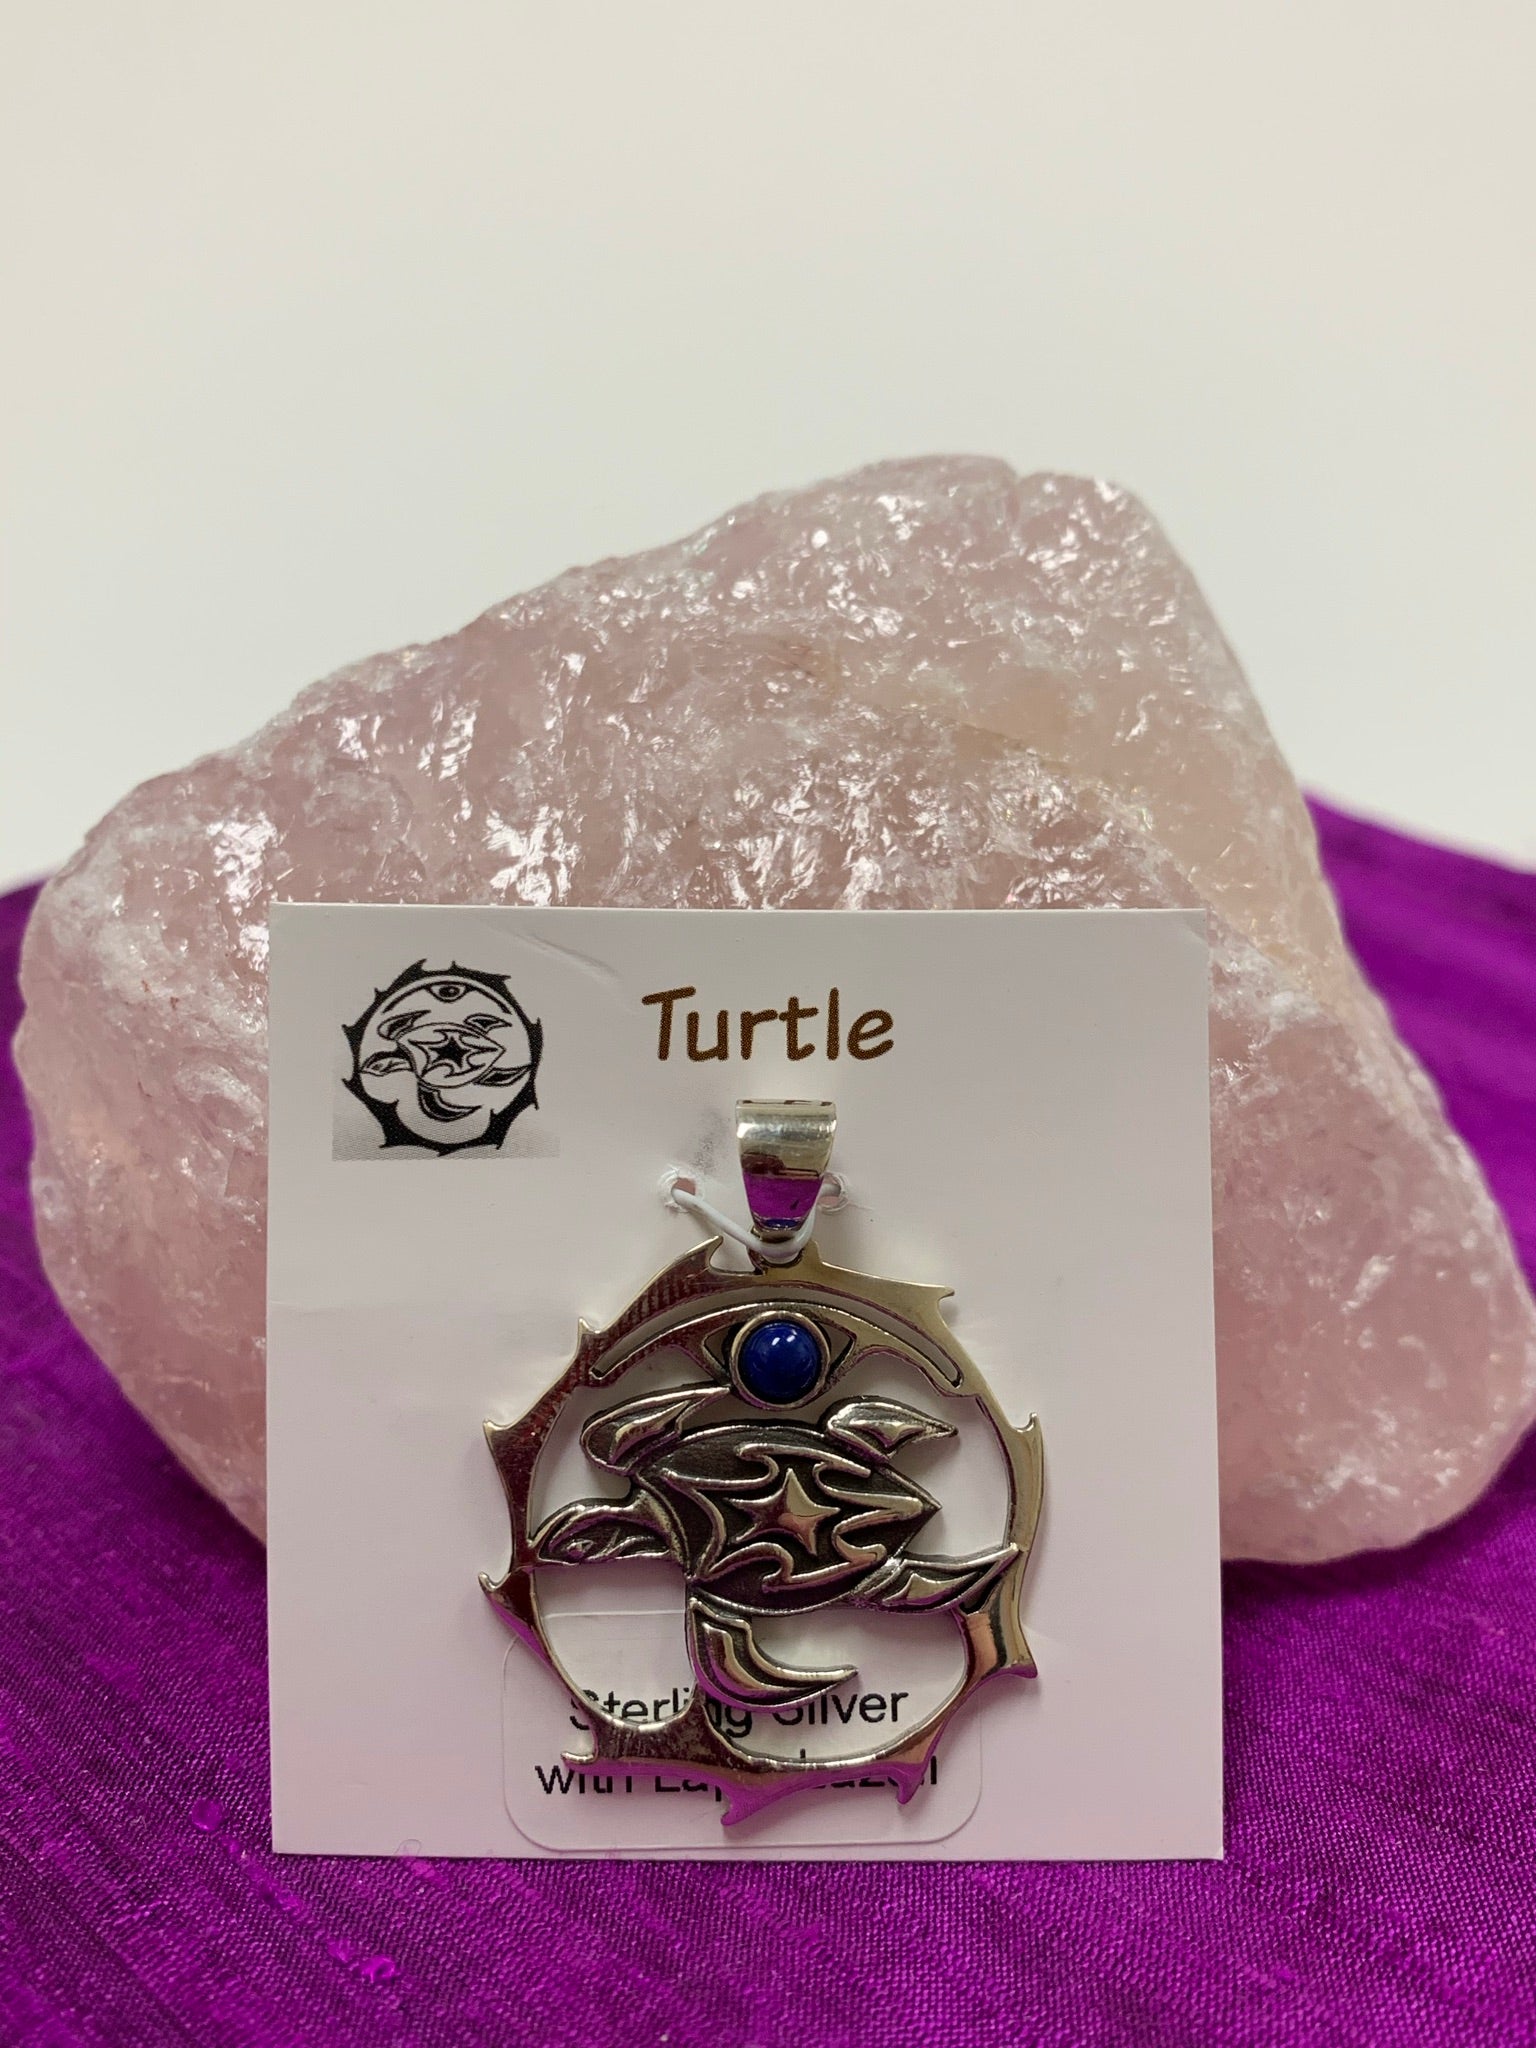 Sterling silver turtle spirit animal pendant with lapis gemstone (cab). The sea turtle is within a stylized circle, with the lapis gemstone above it. Wear your spirit animal on your chest and have it wherever you go! Pendant only - necklace chain not included. 